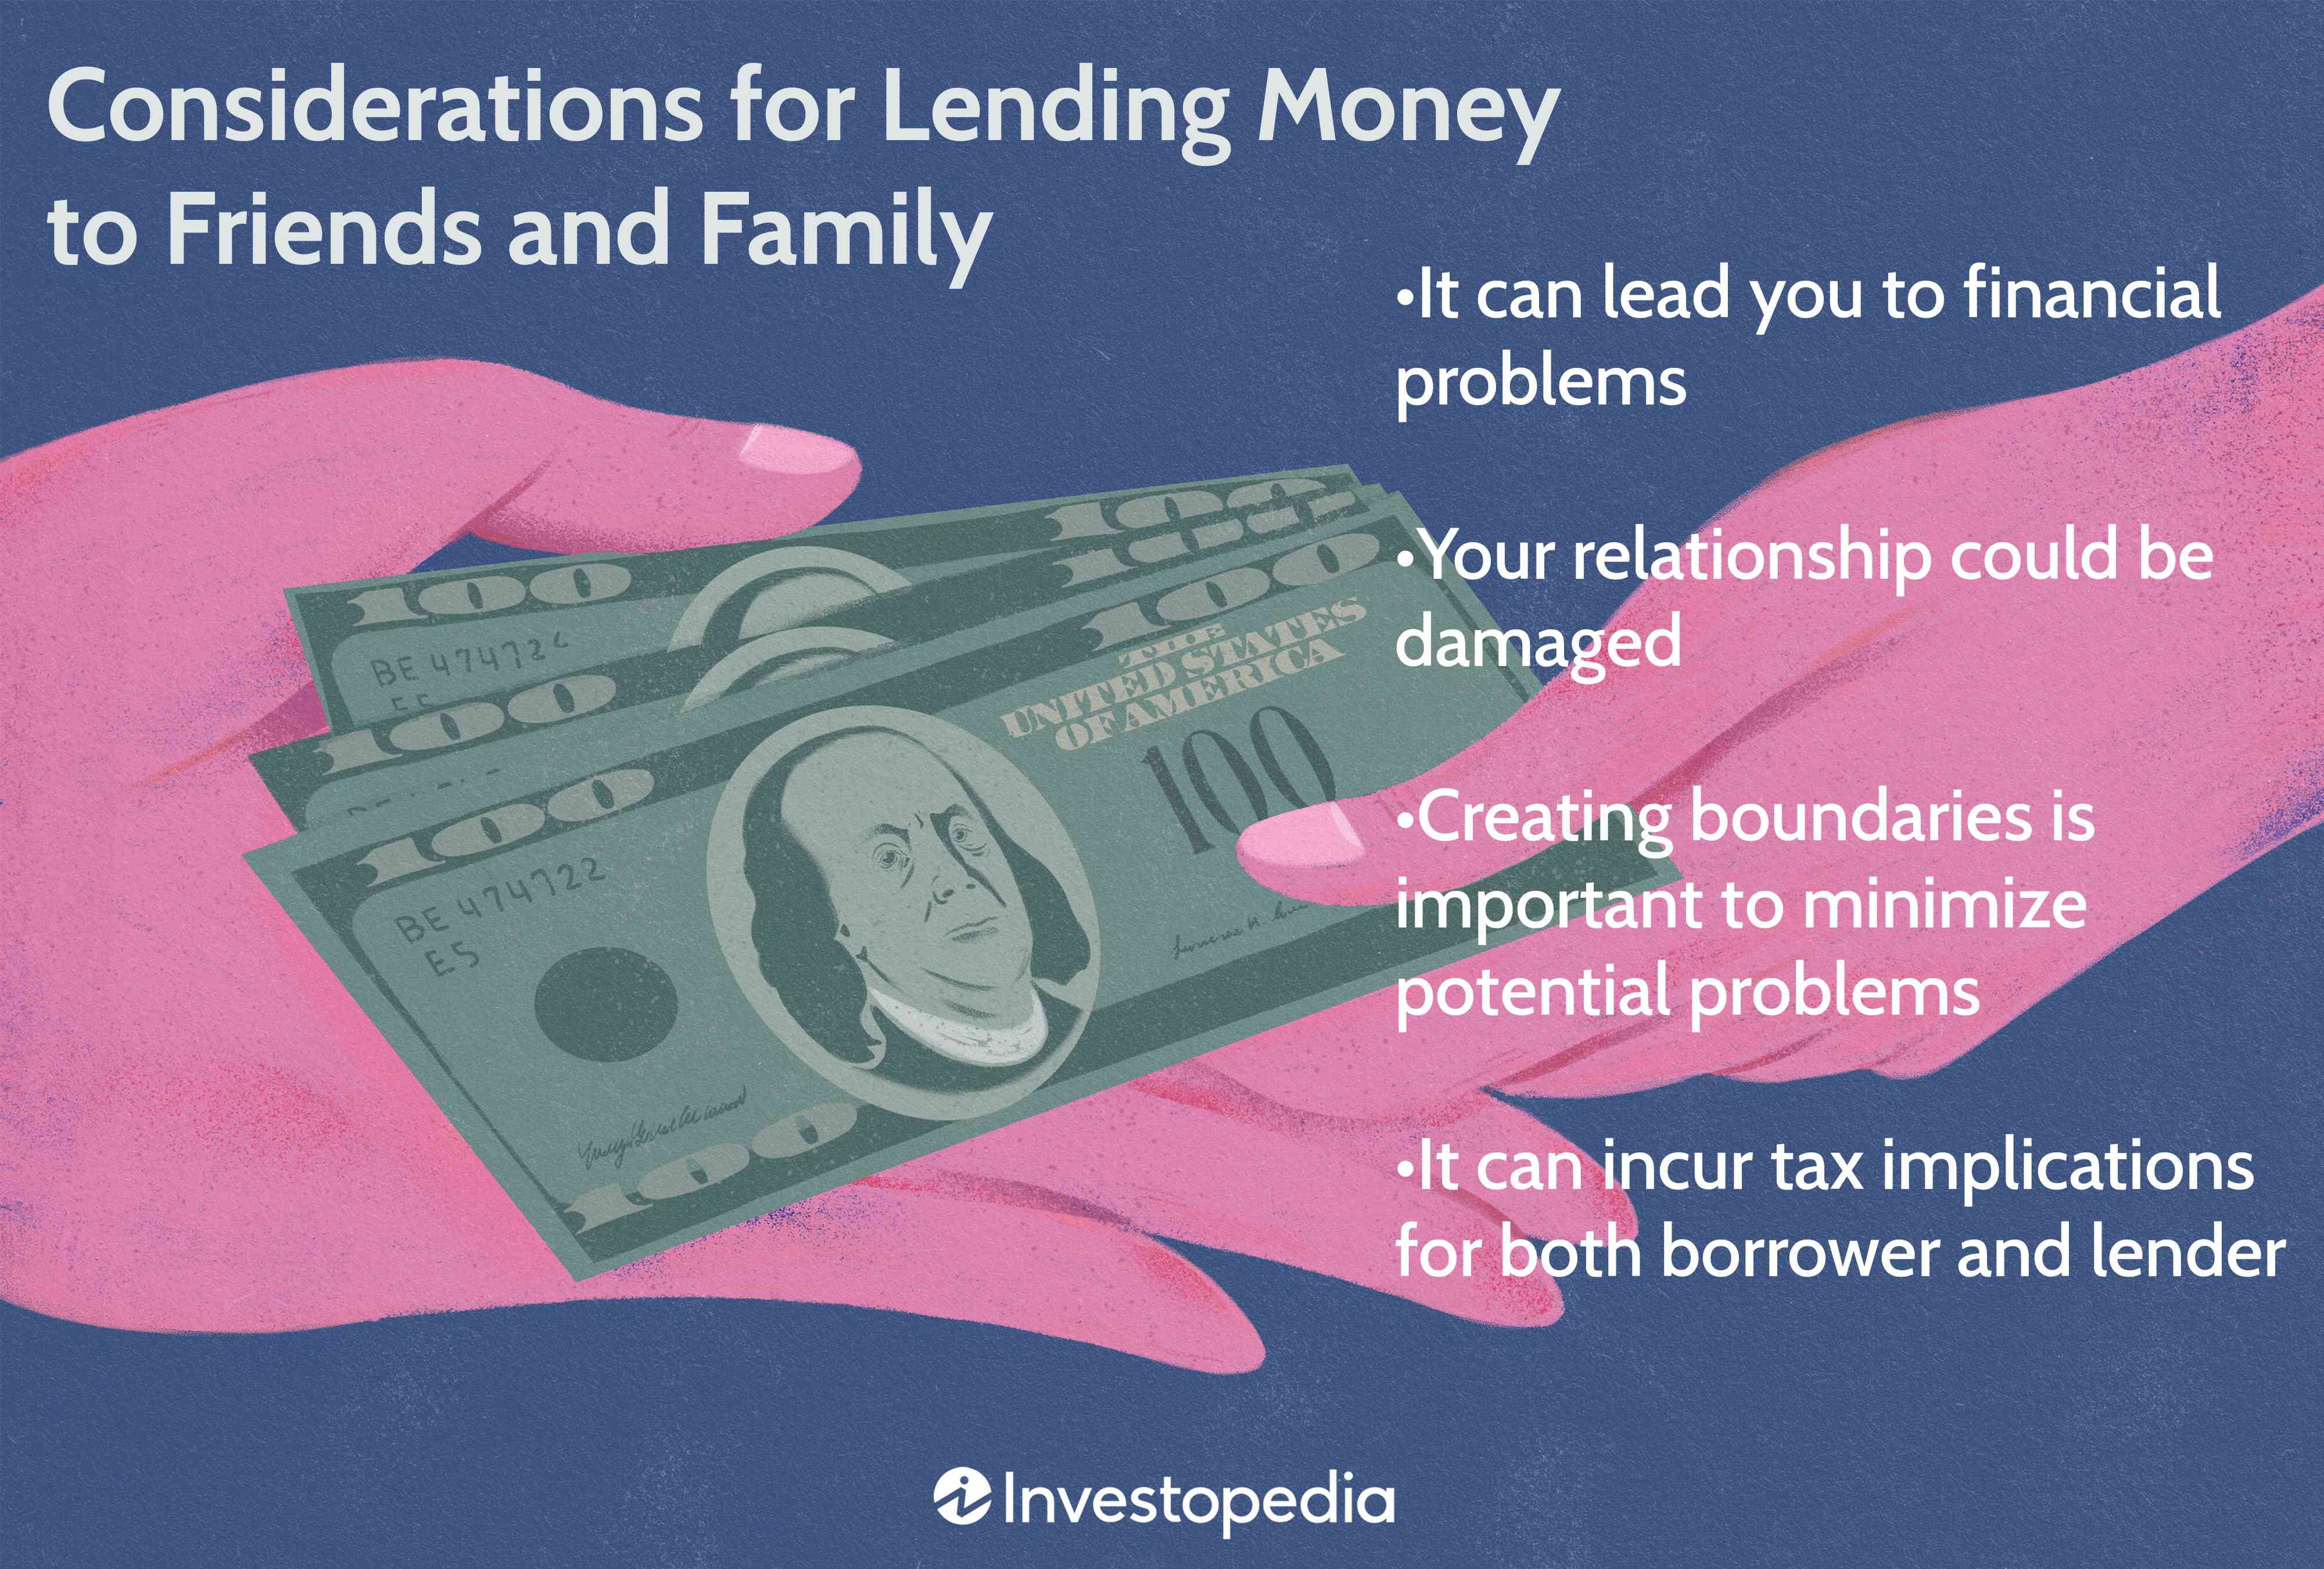 Considerations for Lending Money to Friends and Family